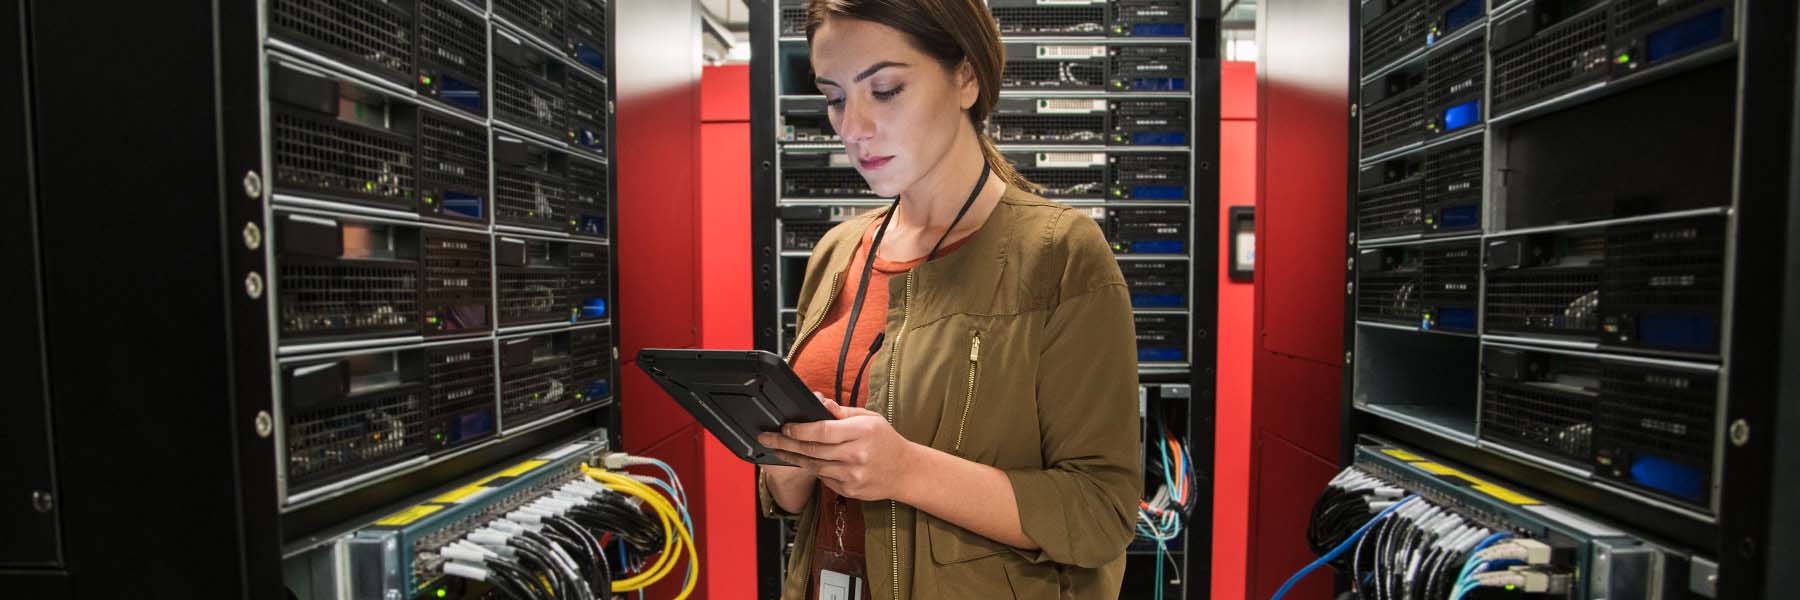 An IU employee works her tablet in a room of server stacks.